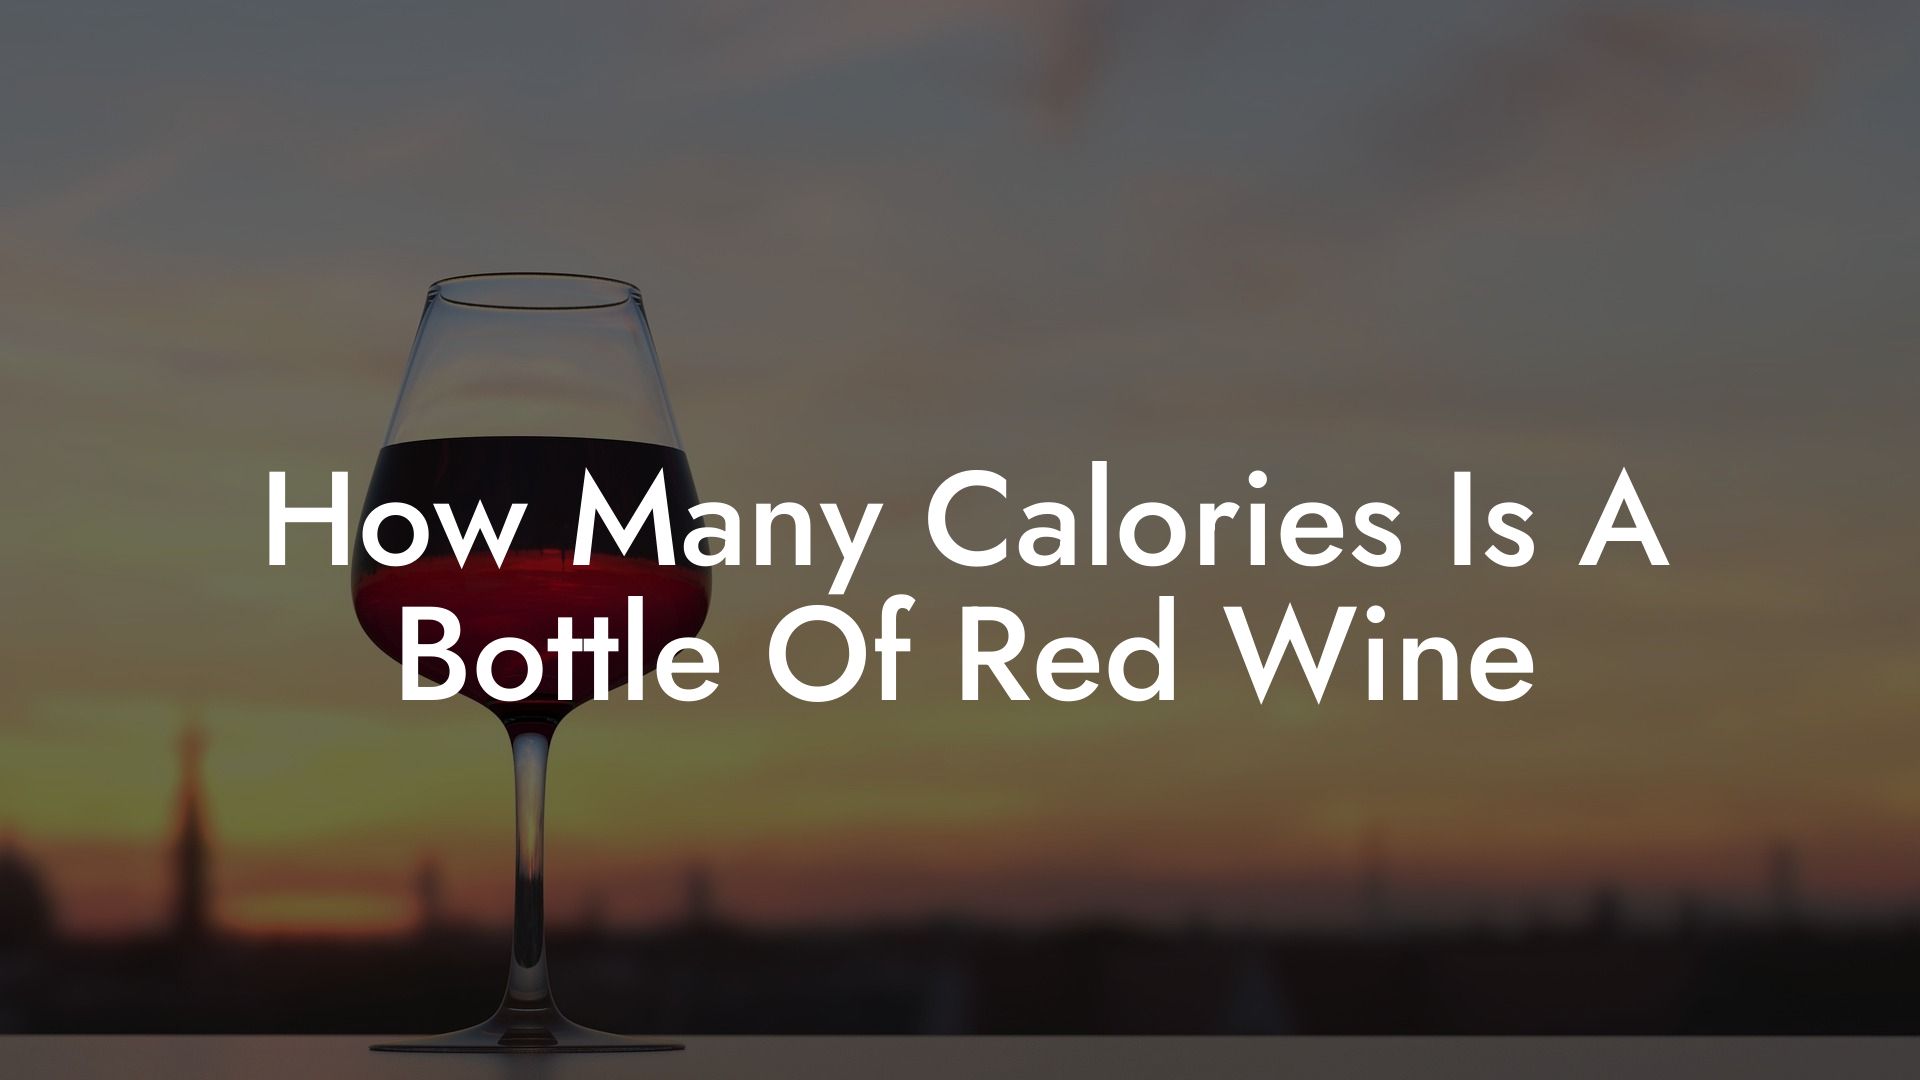 How Many Calories Is A Bottle Of Red Wine